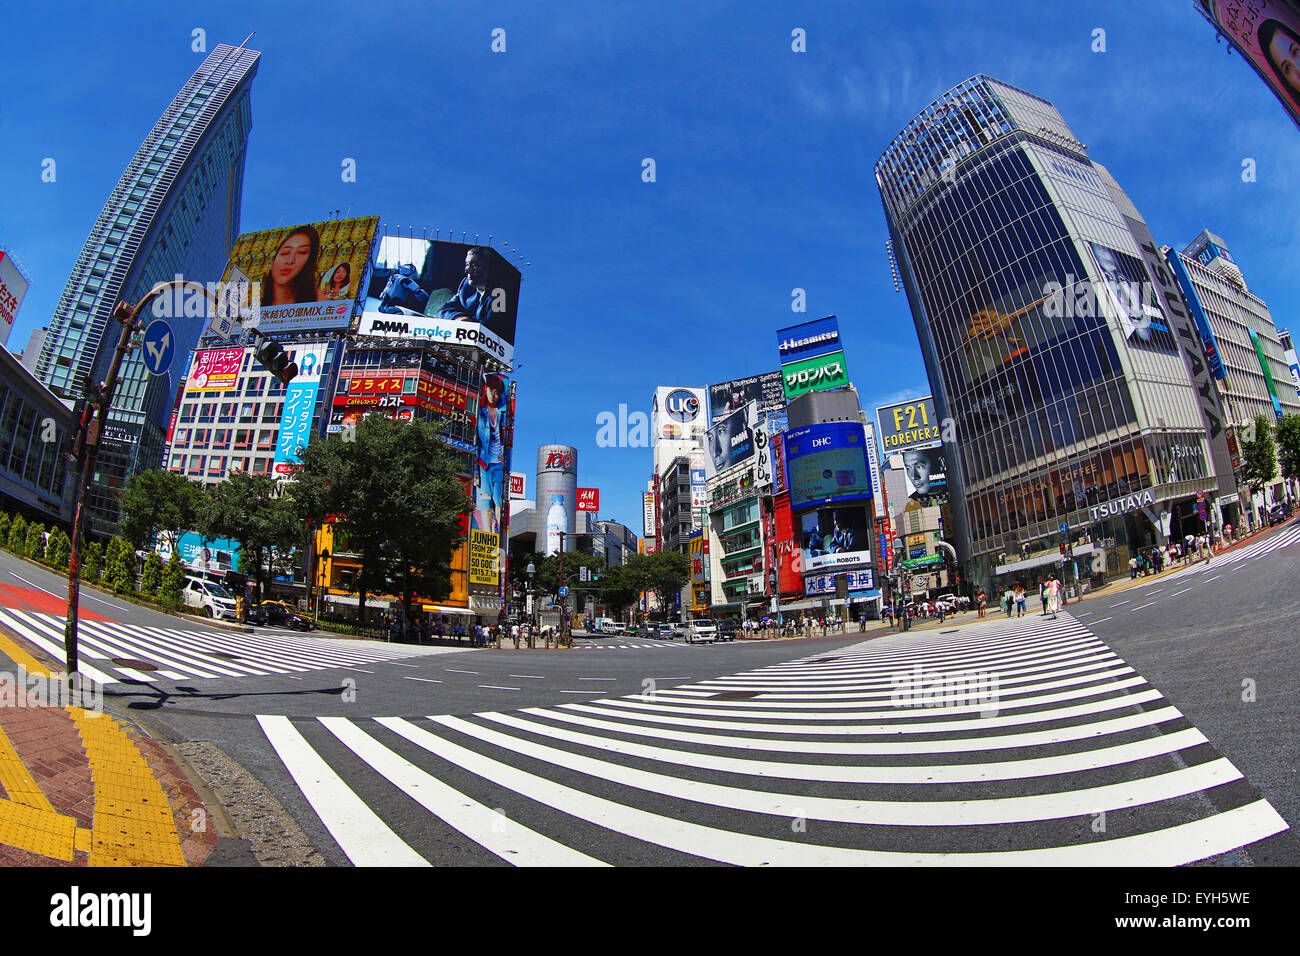 The pedestrian crossing at the intersection in Shibuya, Tokyo, Japan Stock Photo